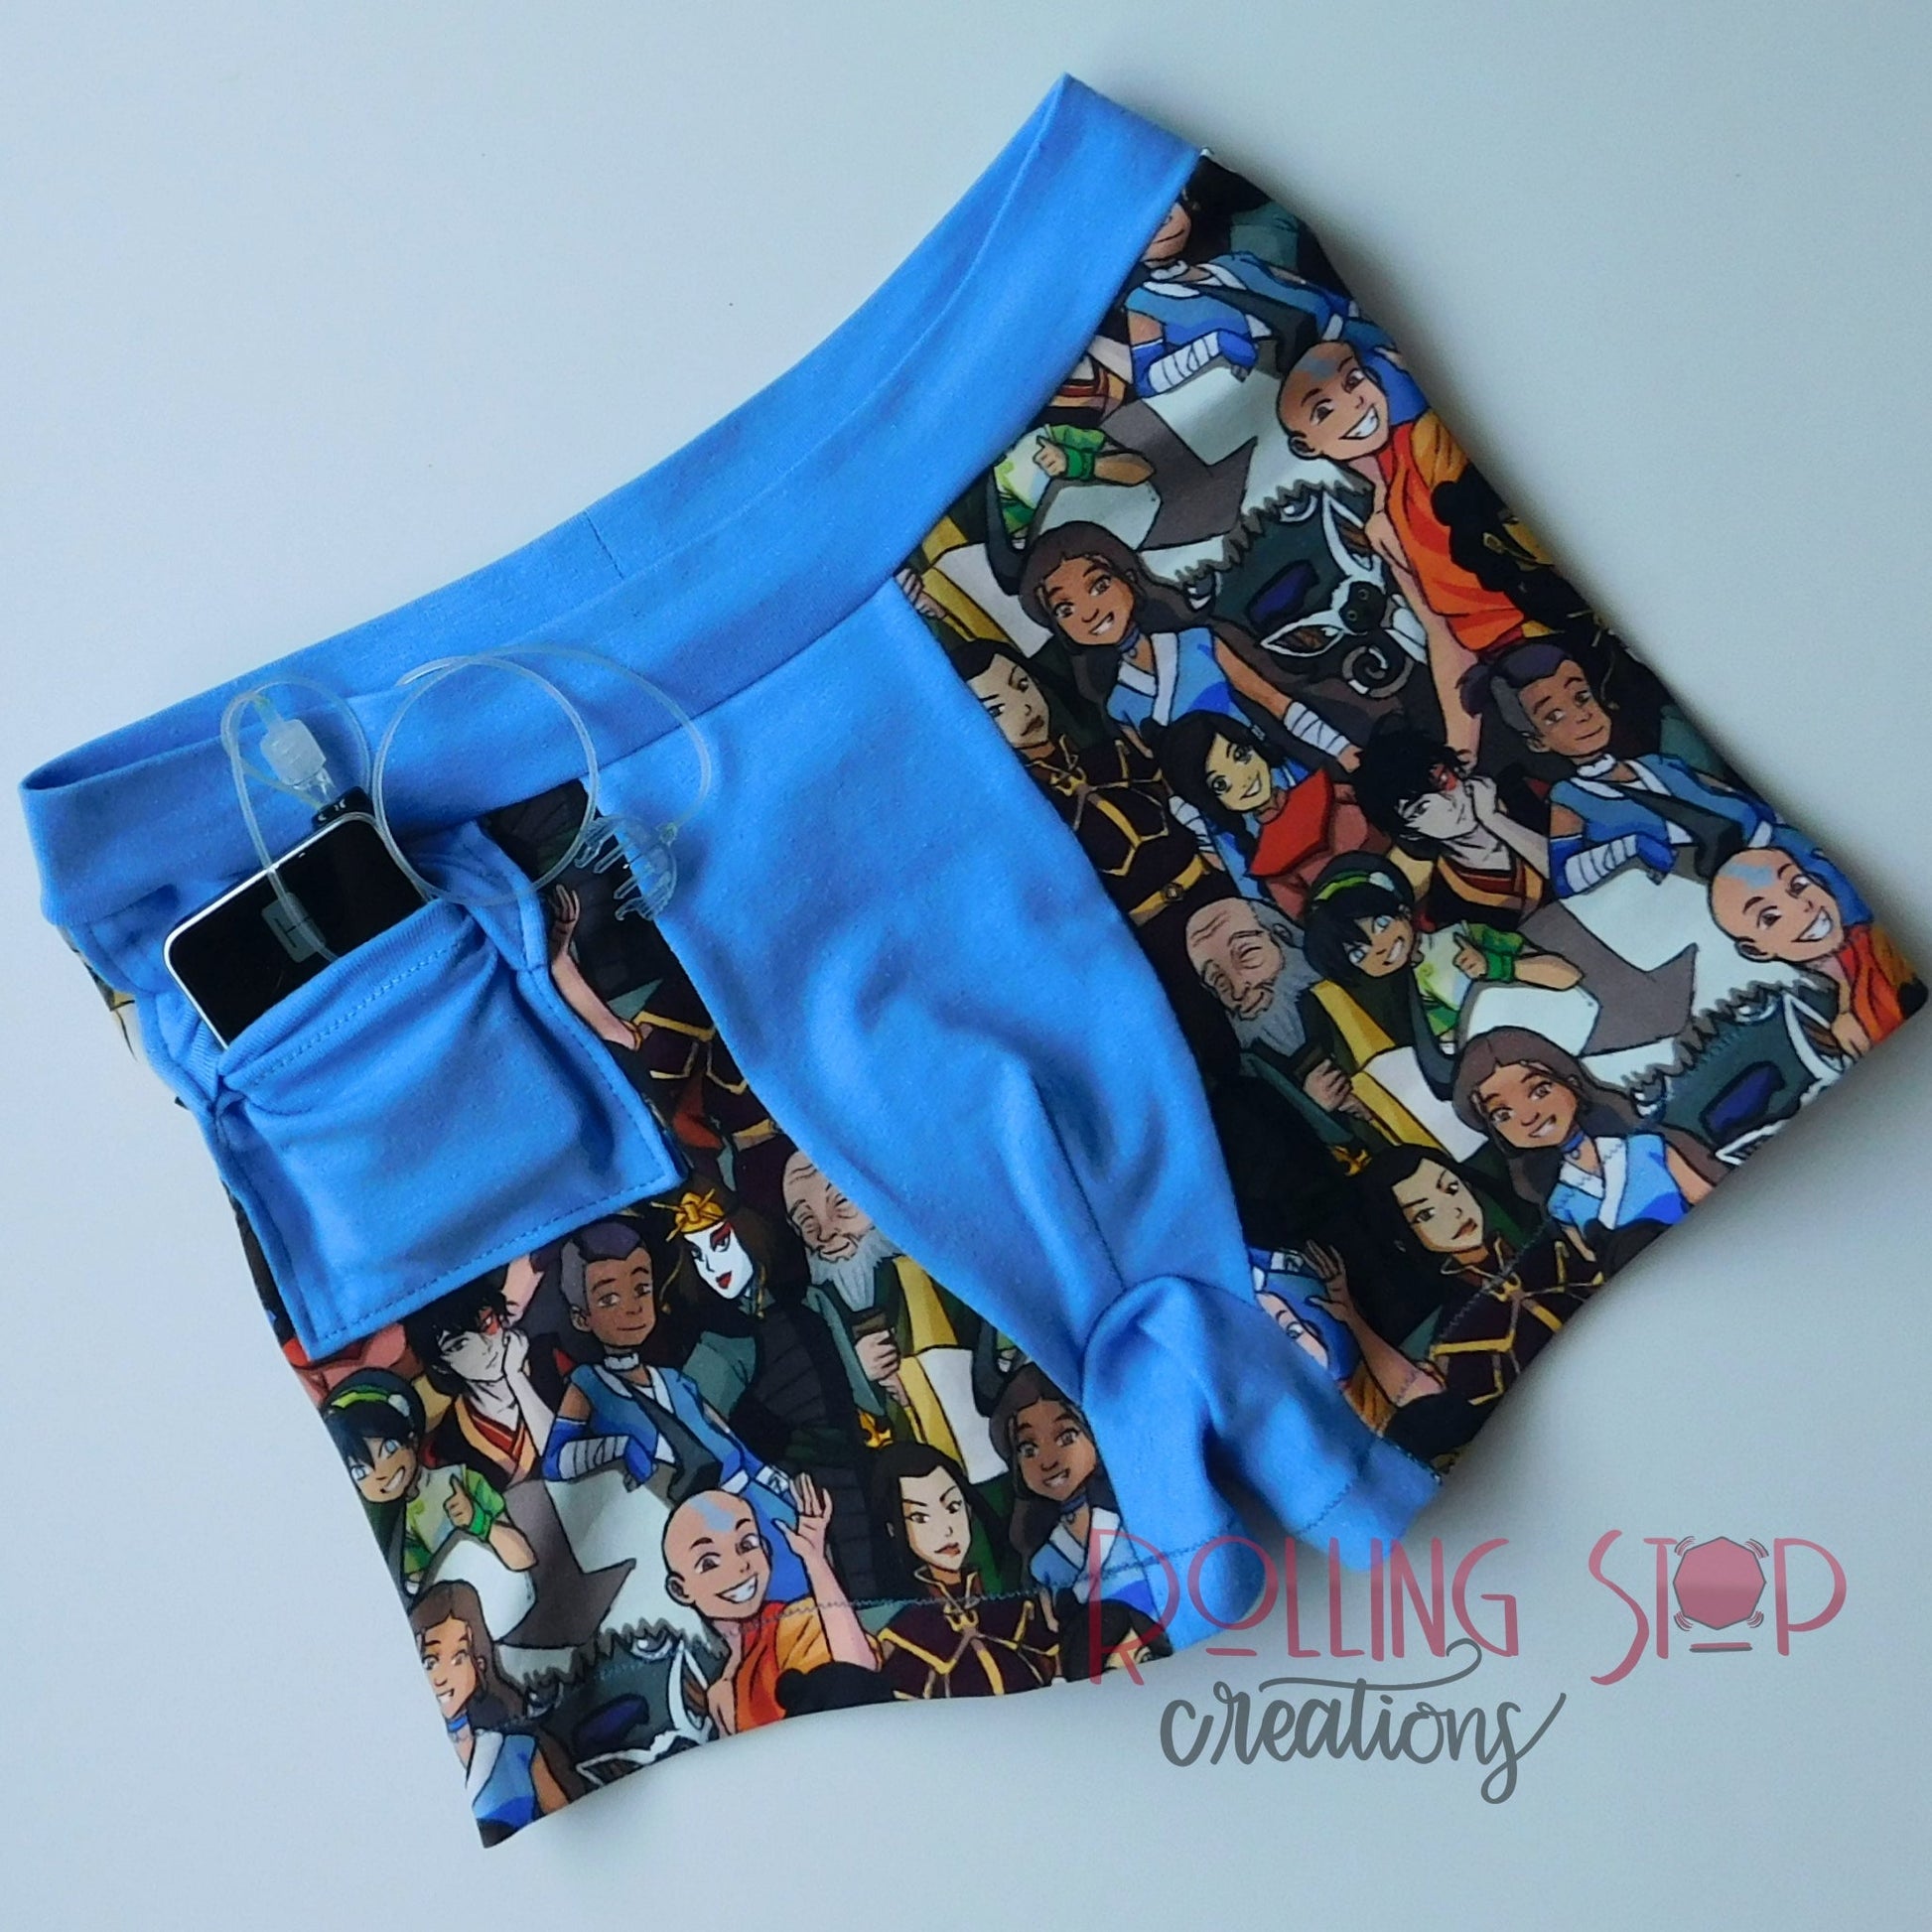 Persimmon Kids' Unisex Athletic Boxer Briefs by Rolling Stop Creations sold by Rolling Stop Creations Everyday Jundies